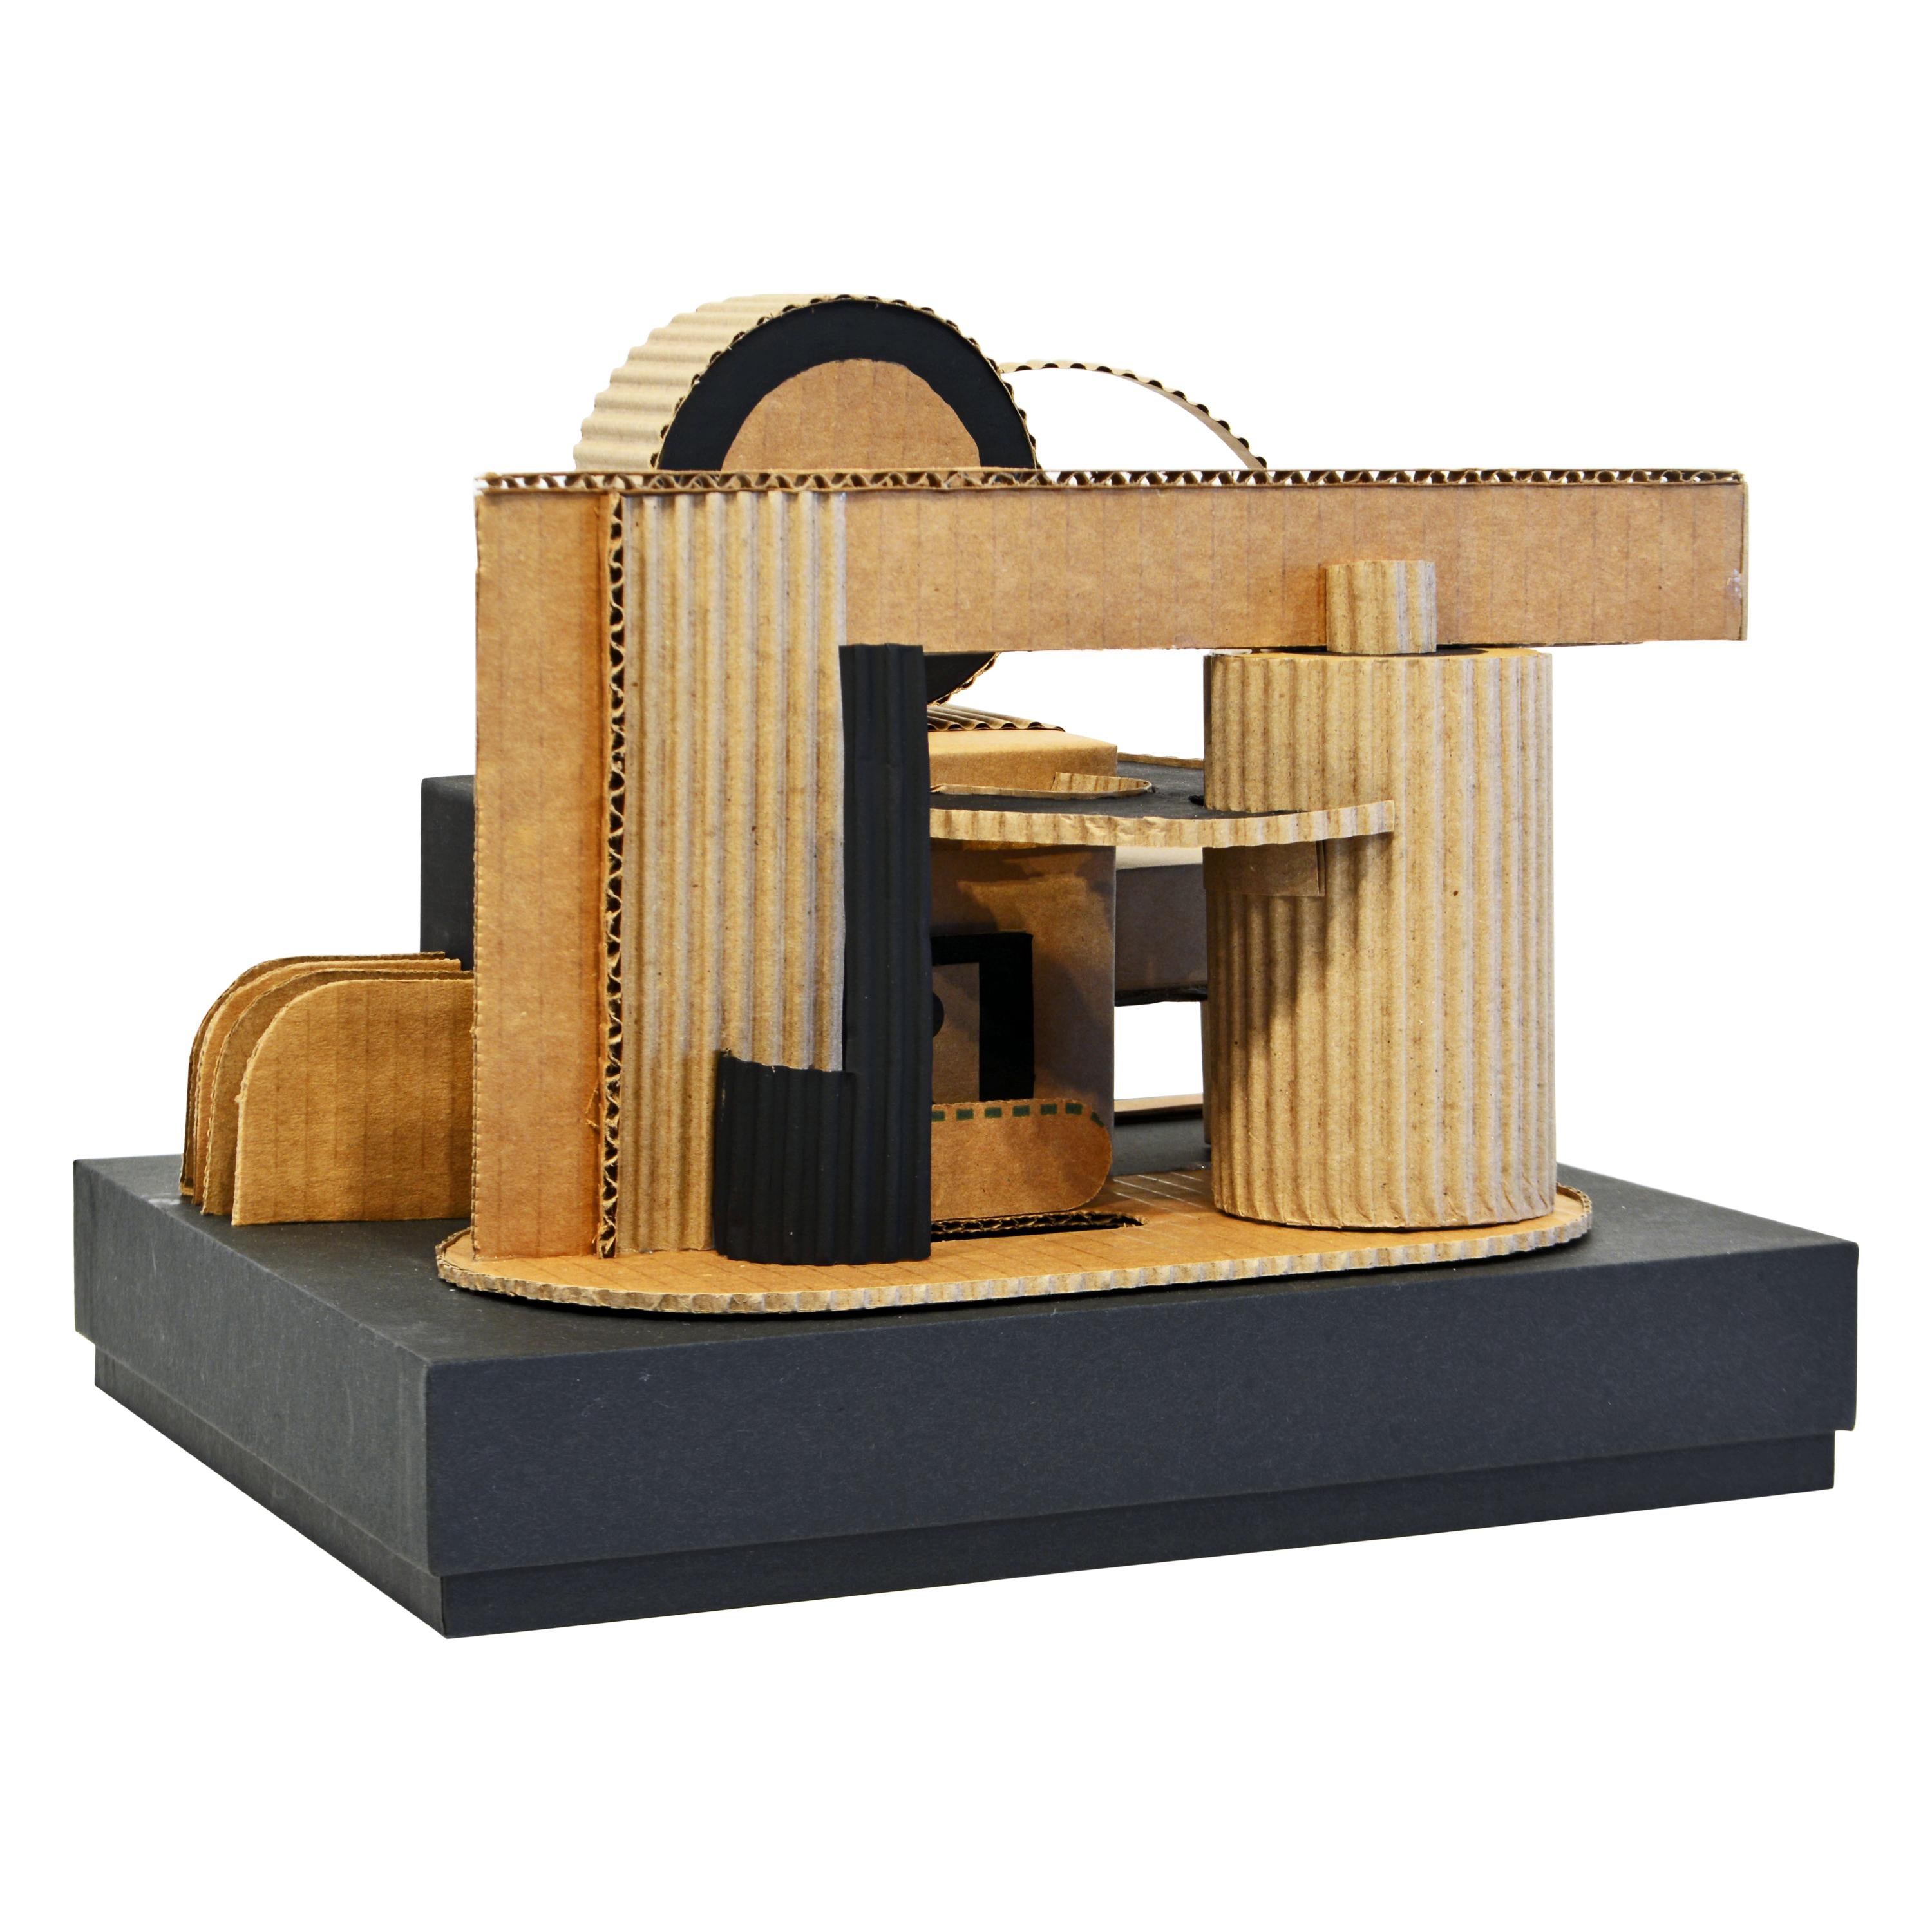 Cubist Bauhaus Style Architectural Cardboard Table Sculpture by Virgil Greca